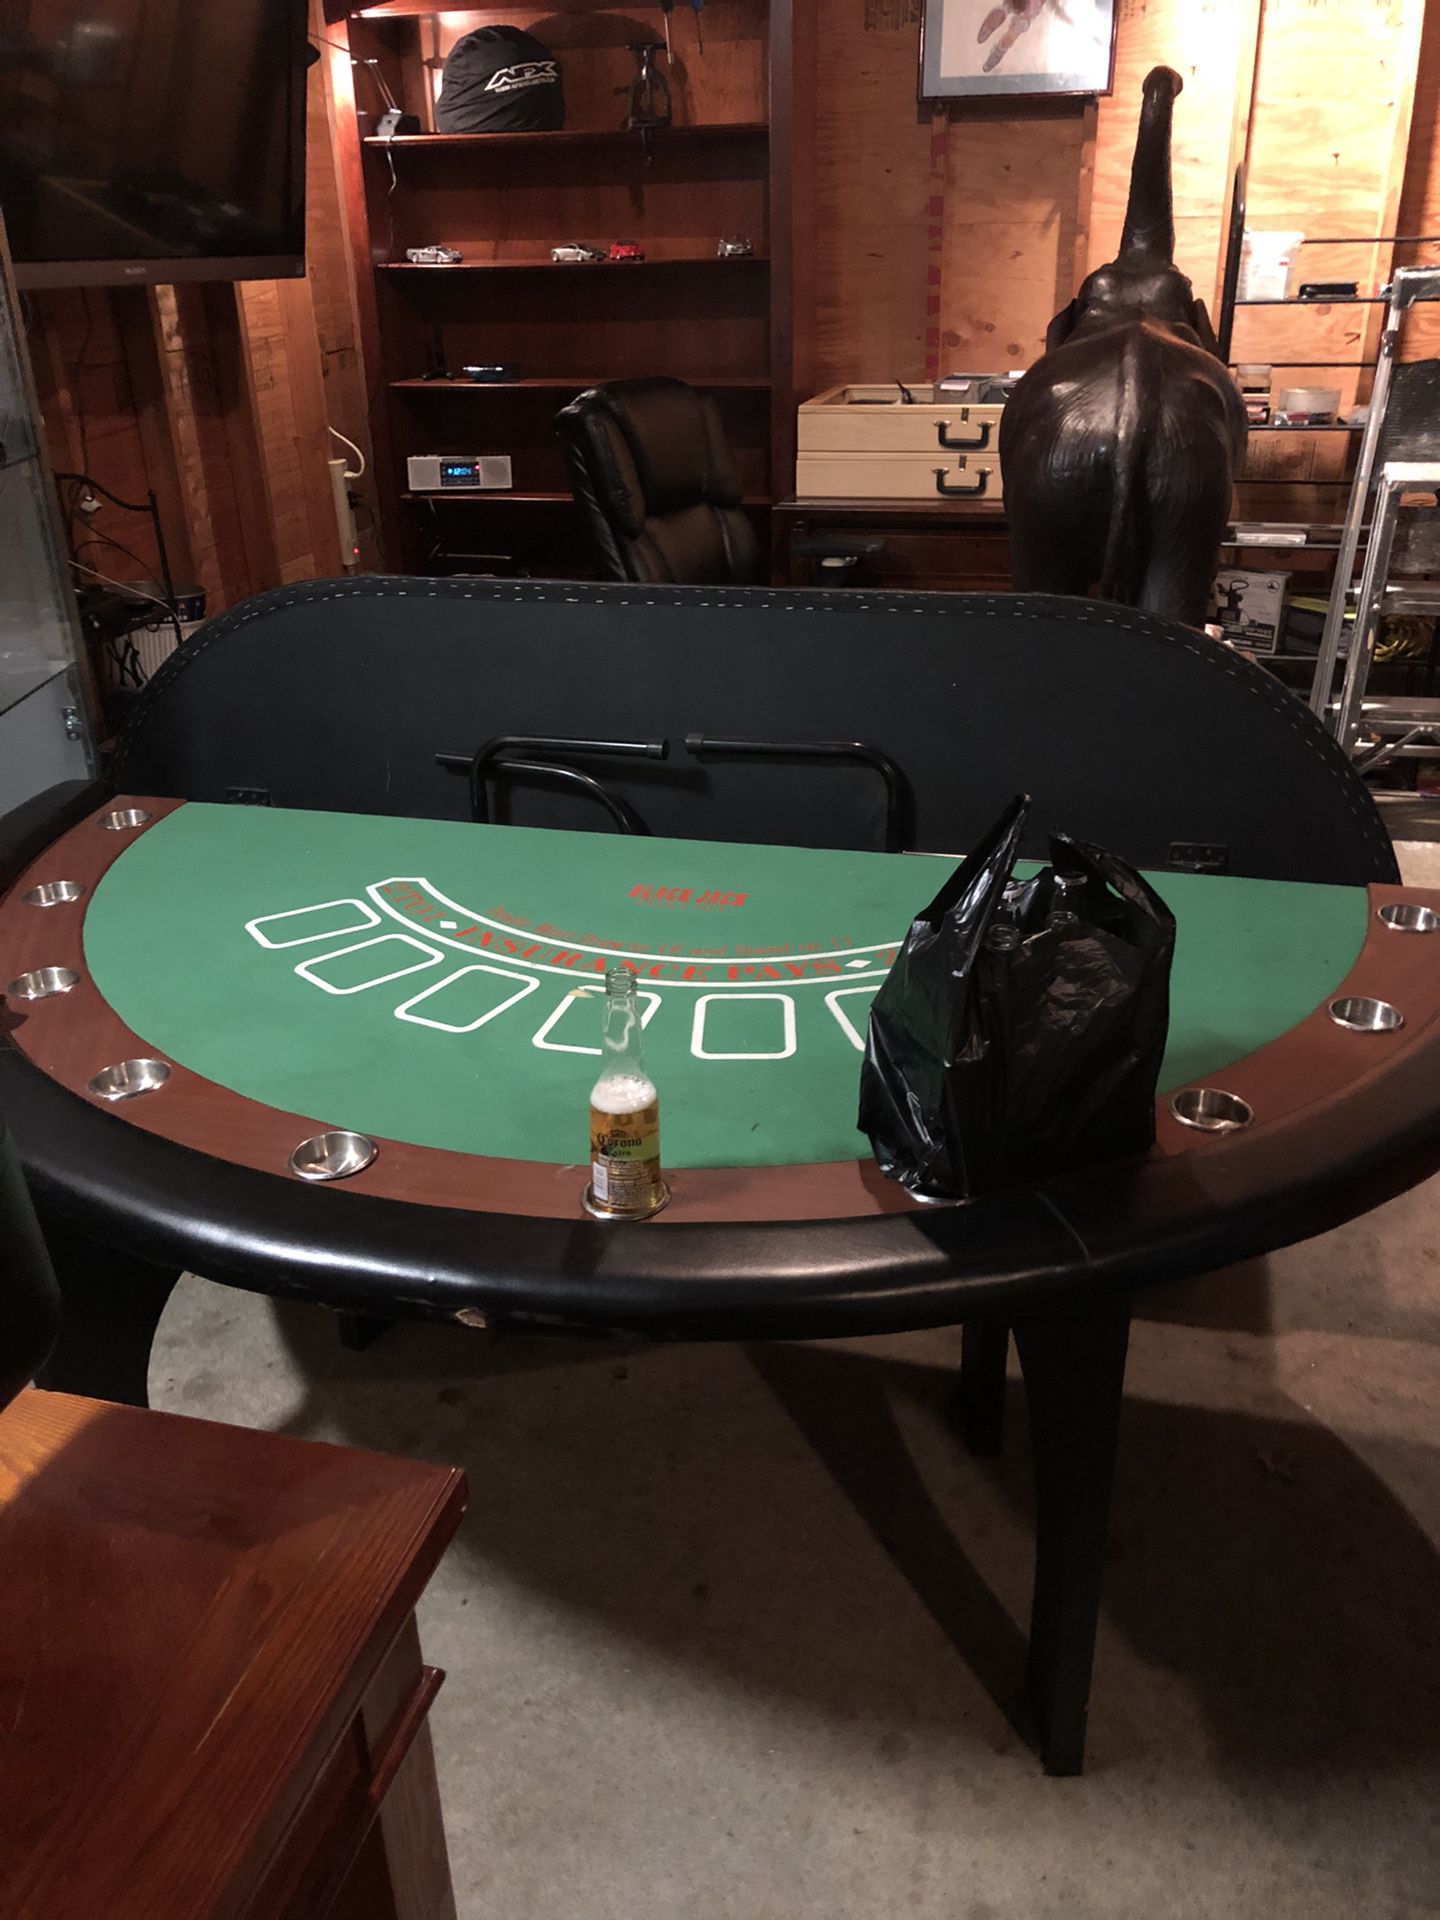 Blackjack table little rip that is being fixed with black electric tape besides that in pretty good condition